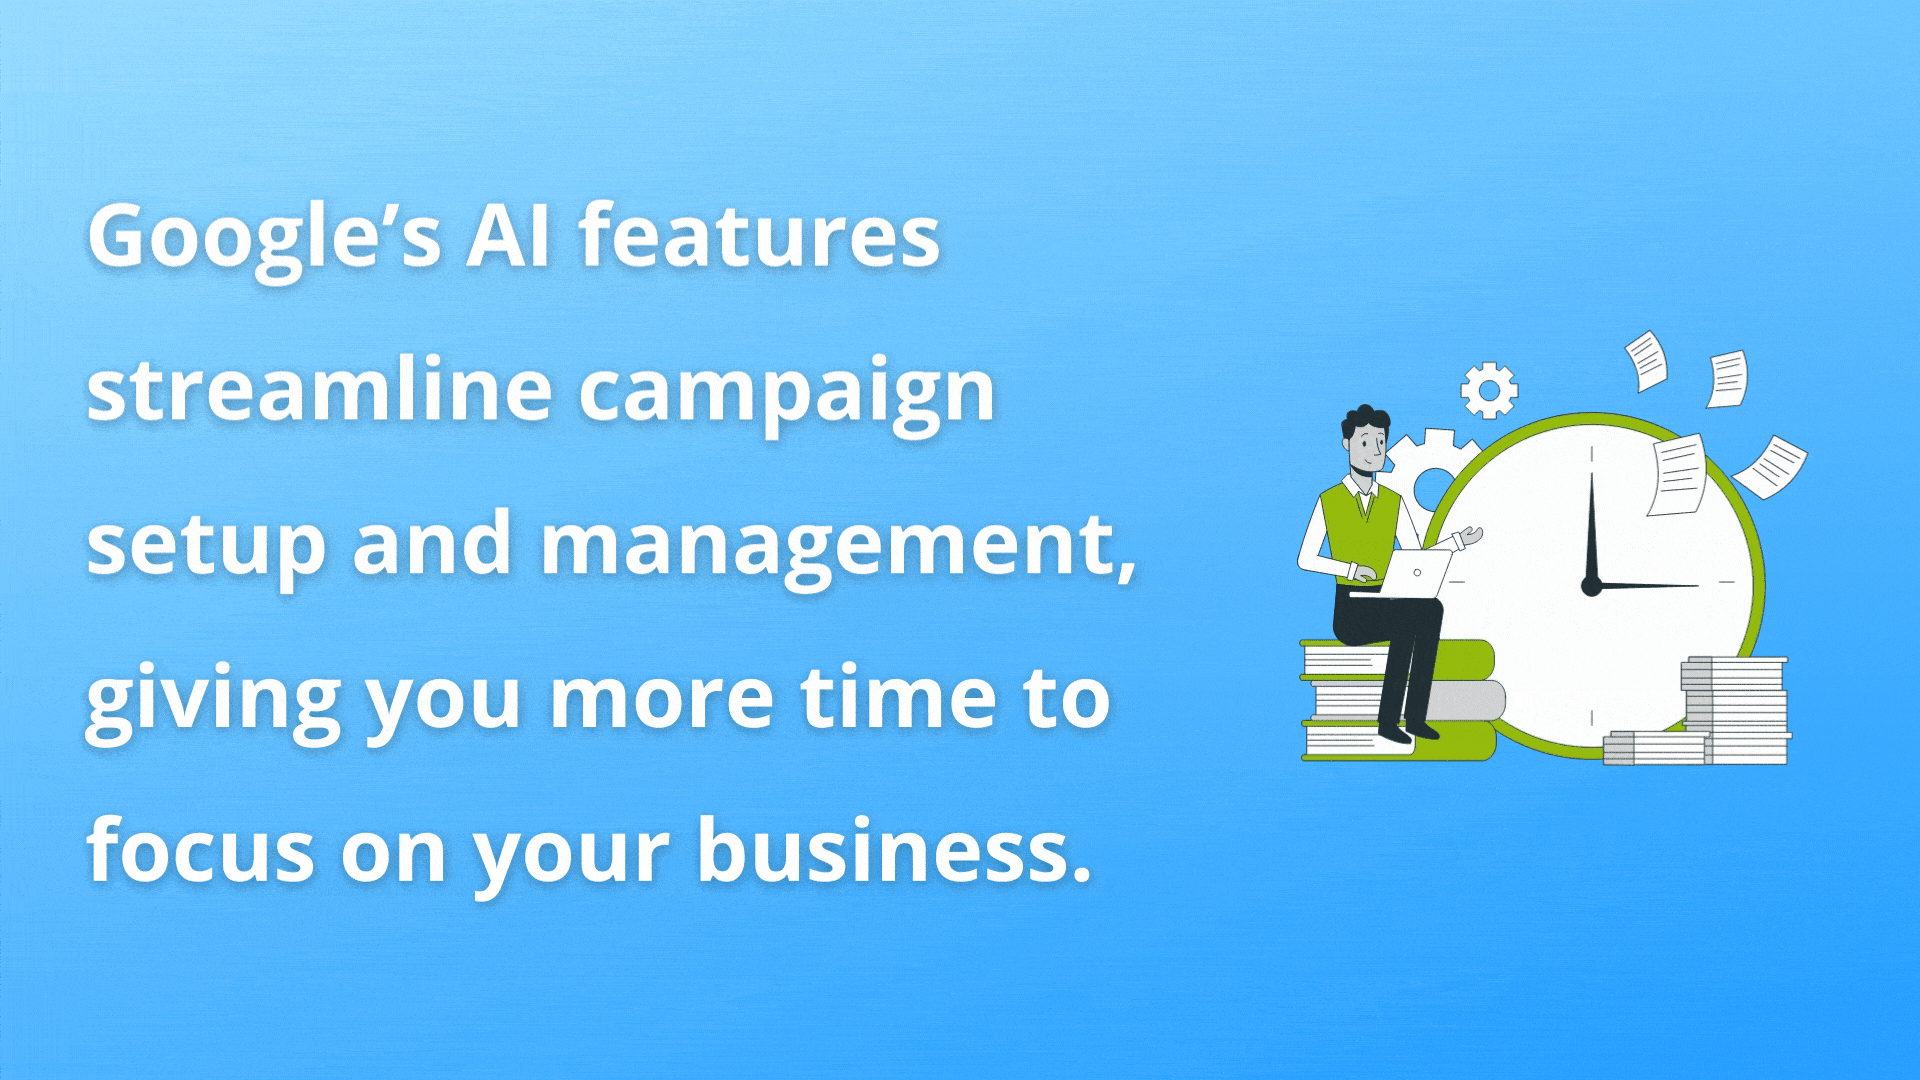 Google Ads AI features can save you time